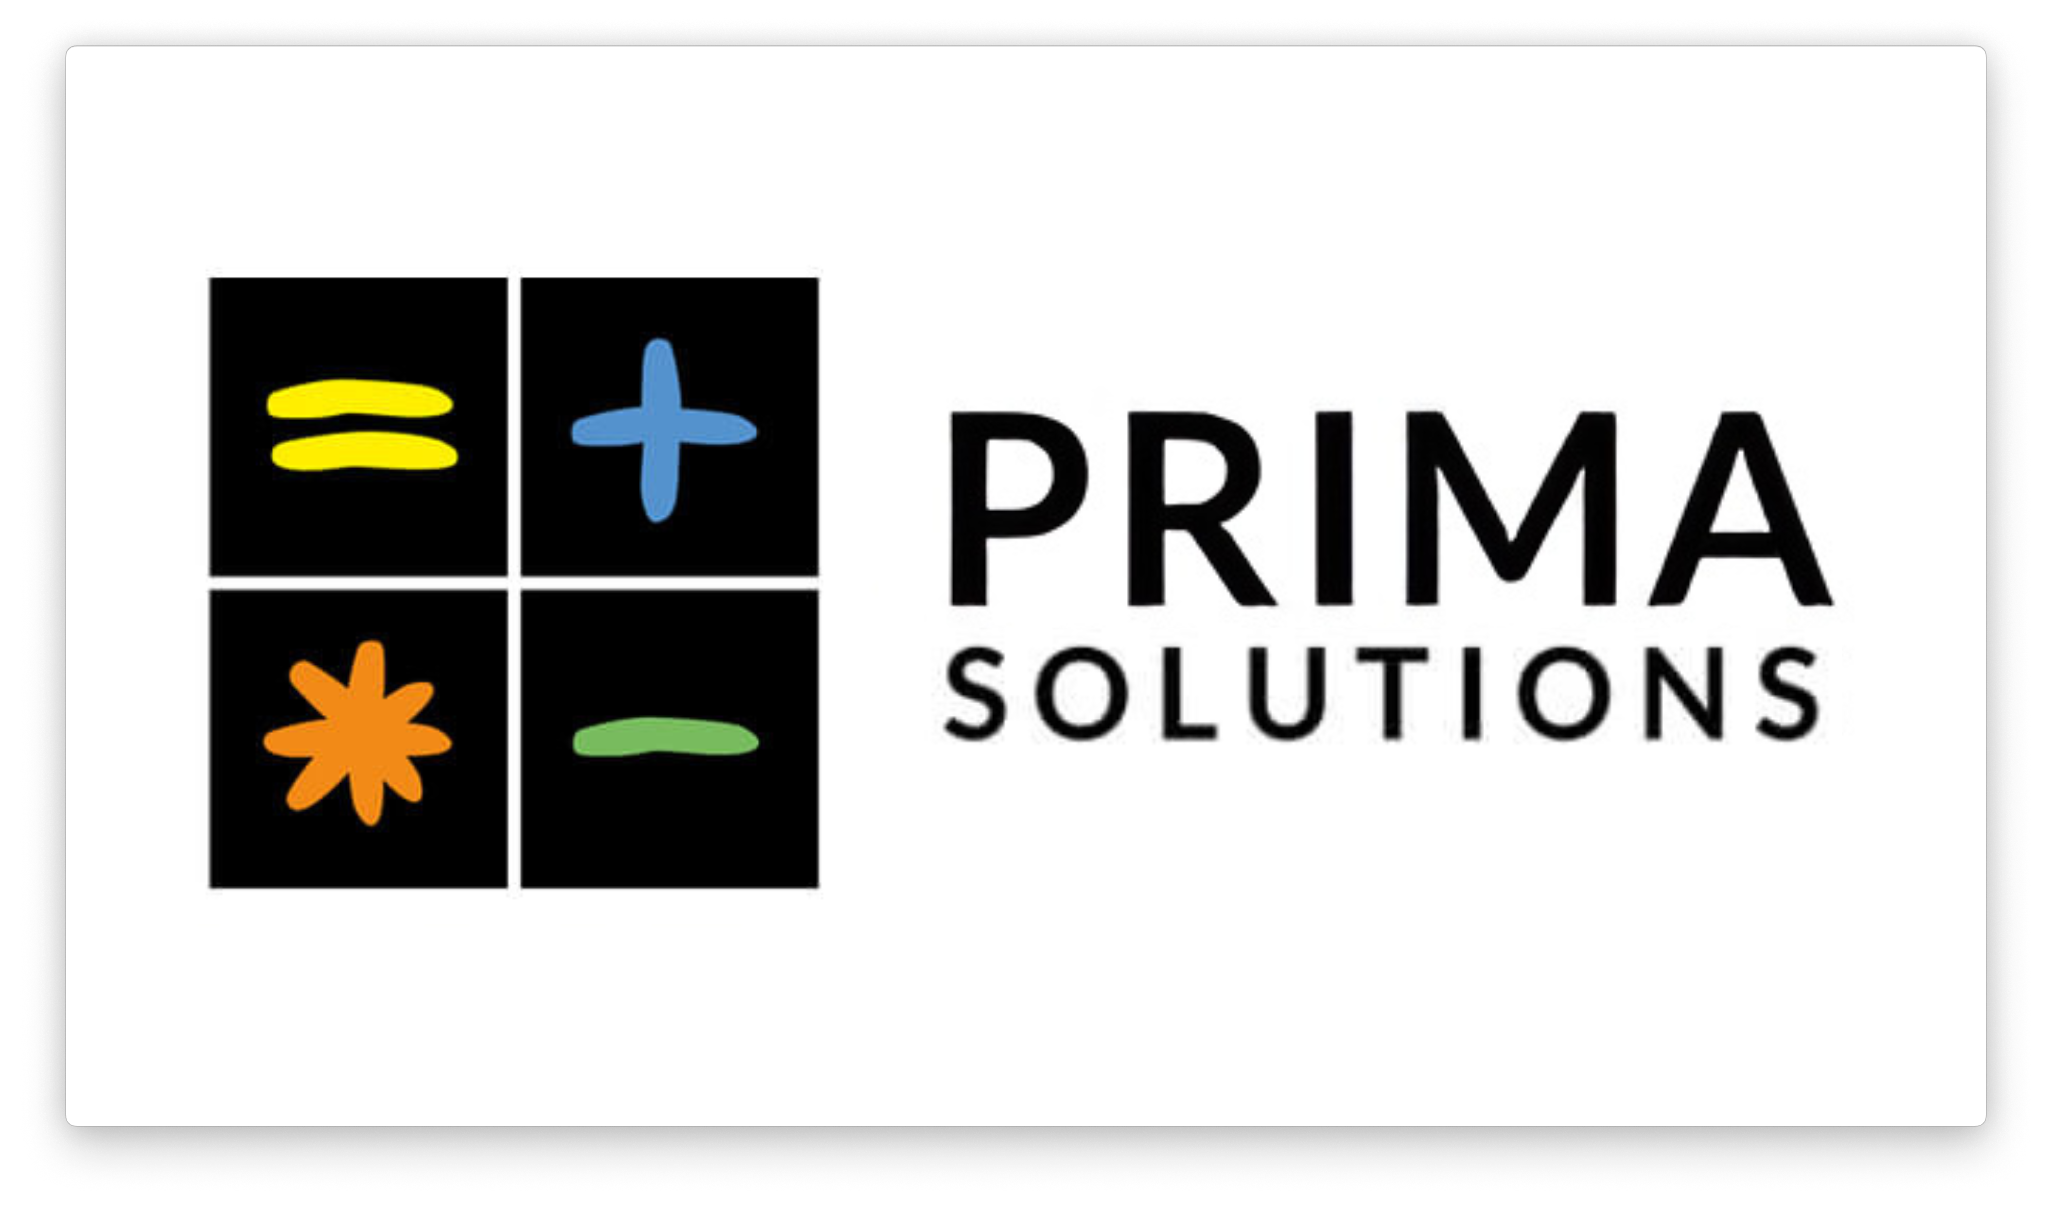 Prima Integration with Shopify following eCommerce development from magic42